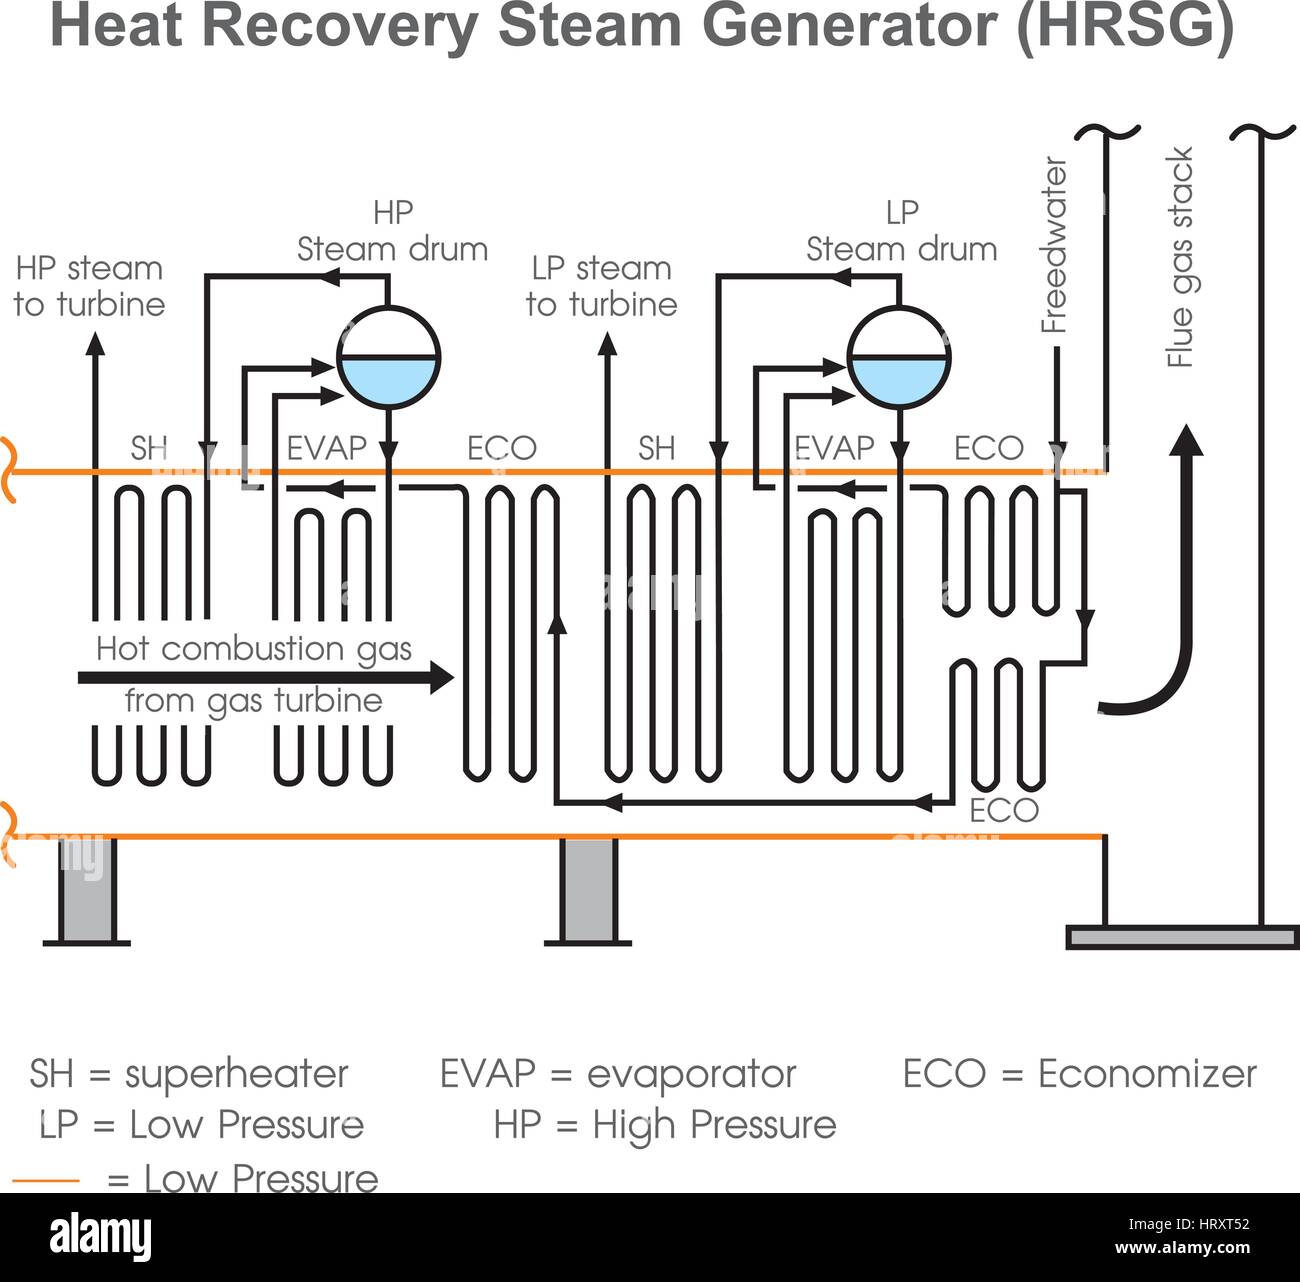 A heat recovery steam generator (HRSG) is an energy recovery heat exchanger that recovers heat from a hot gas stream. It produces steam that can be us Stock Vector